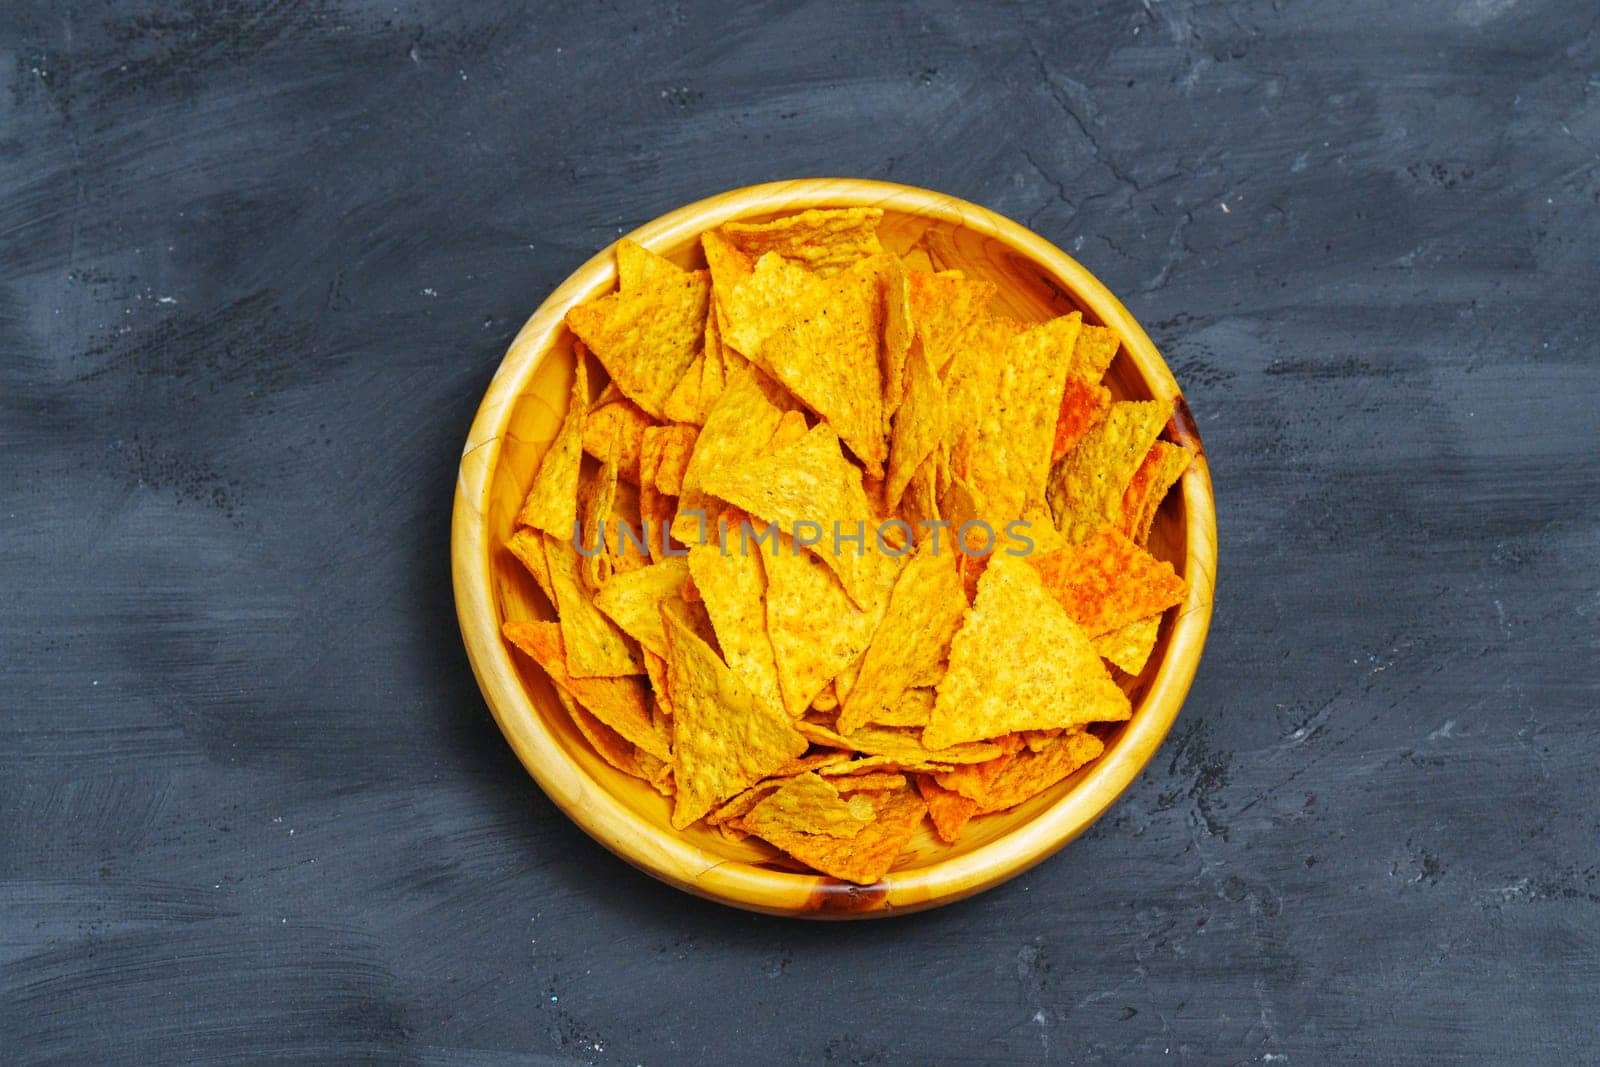 Bowl is filled with crispy tortilla chips, creating a savory snack ready to be enjoyed.